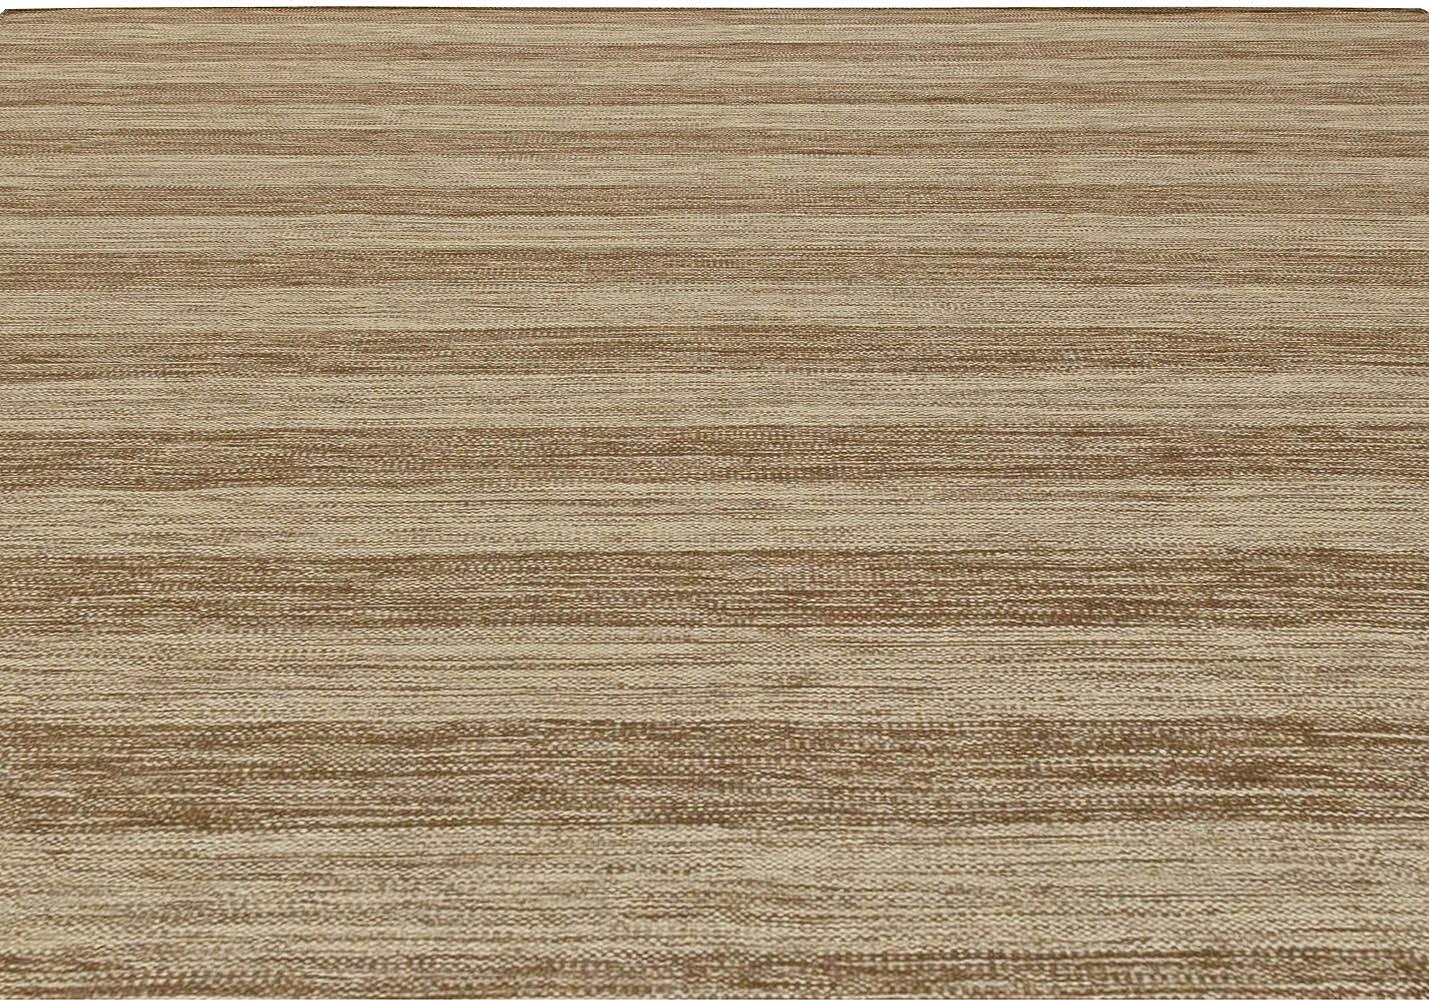 Modern Contemporary Striped Brown and Beige Flat-Weave Wool Rug by Doris Leslie Blau For Sale